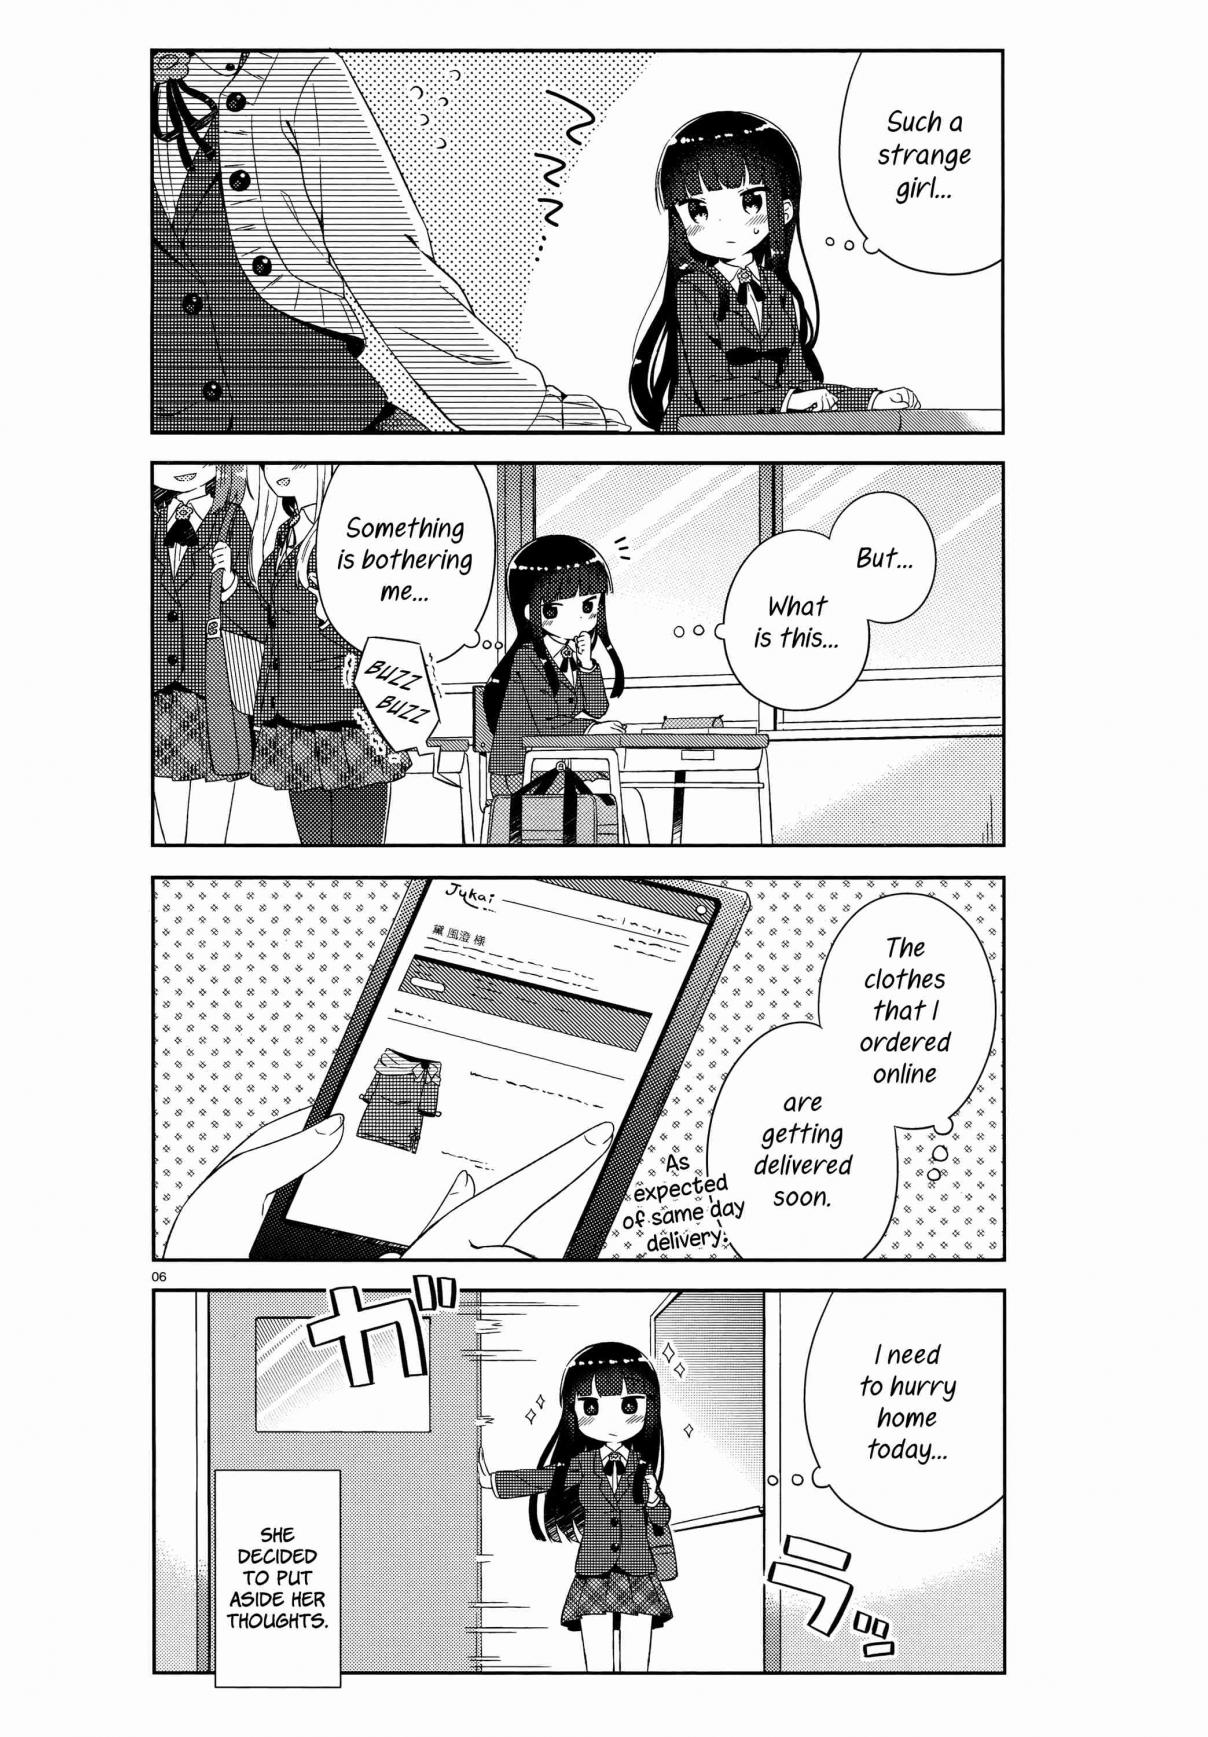 She Gets Girls Every day. Vol. 1 Ch. 1 The secret of the handsome beauty.